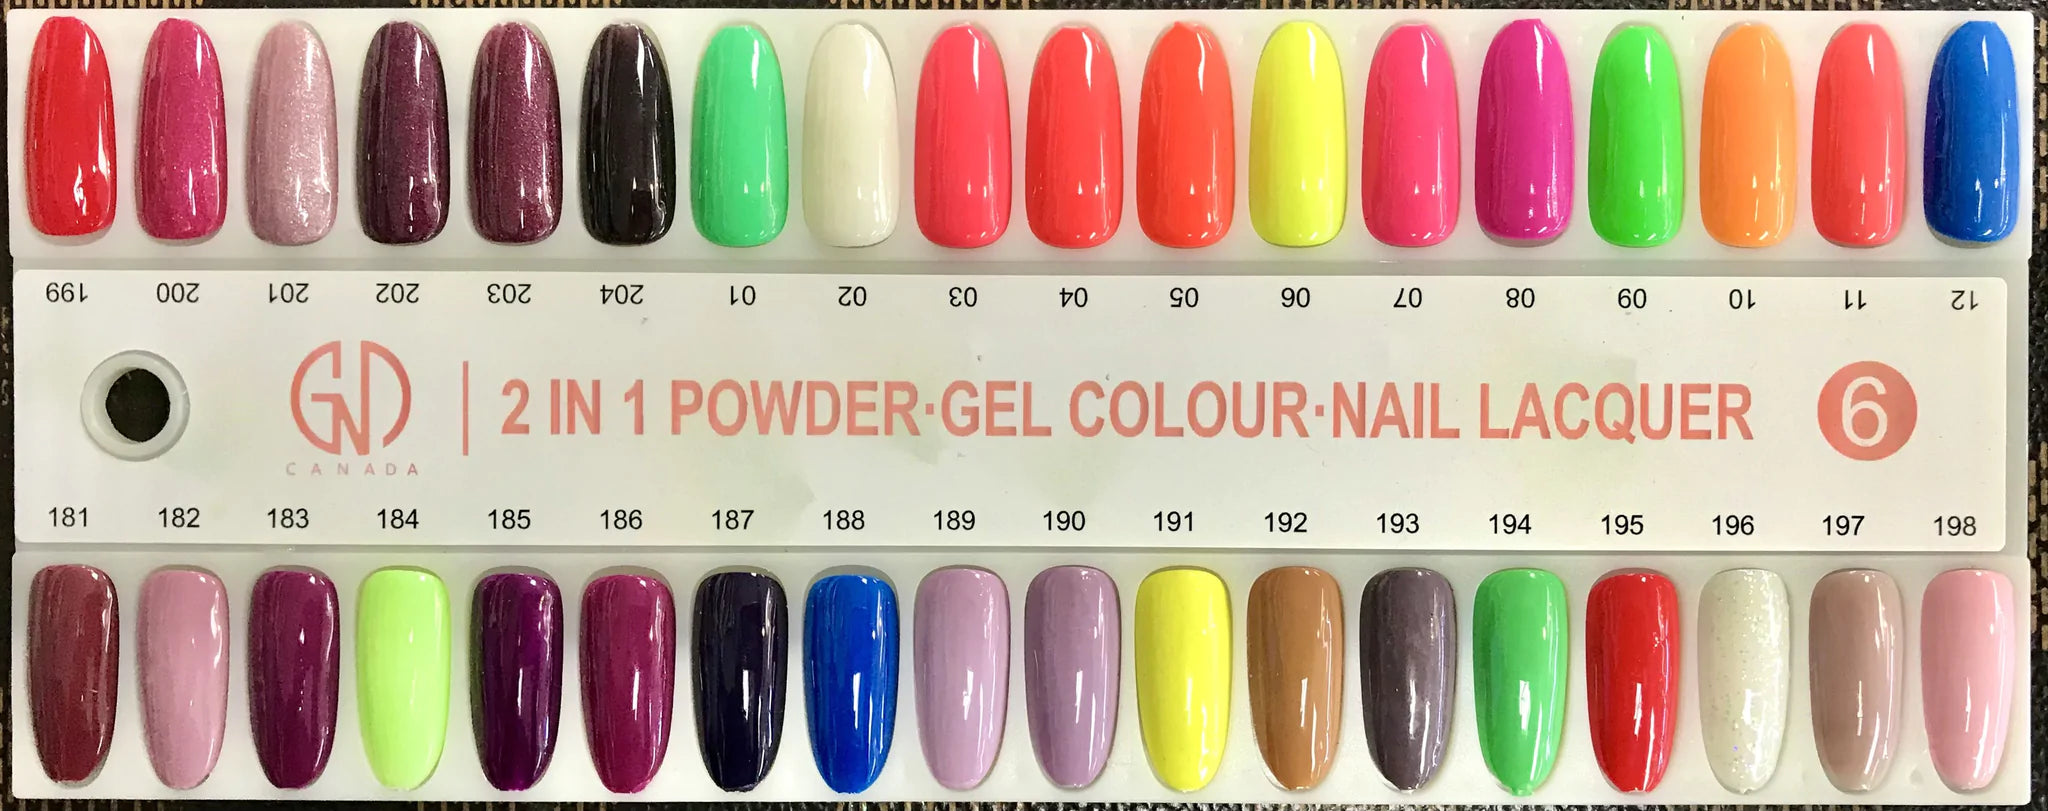 GND Duo Gel & Lacquer 191